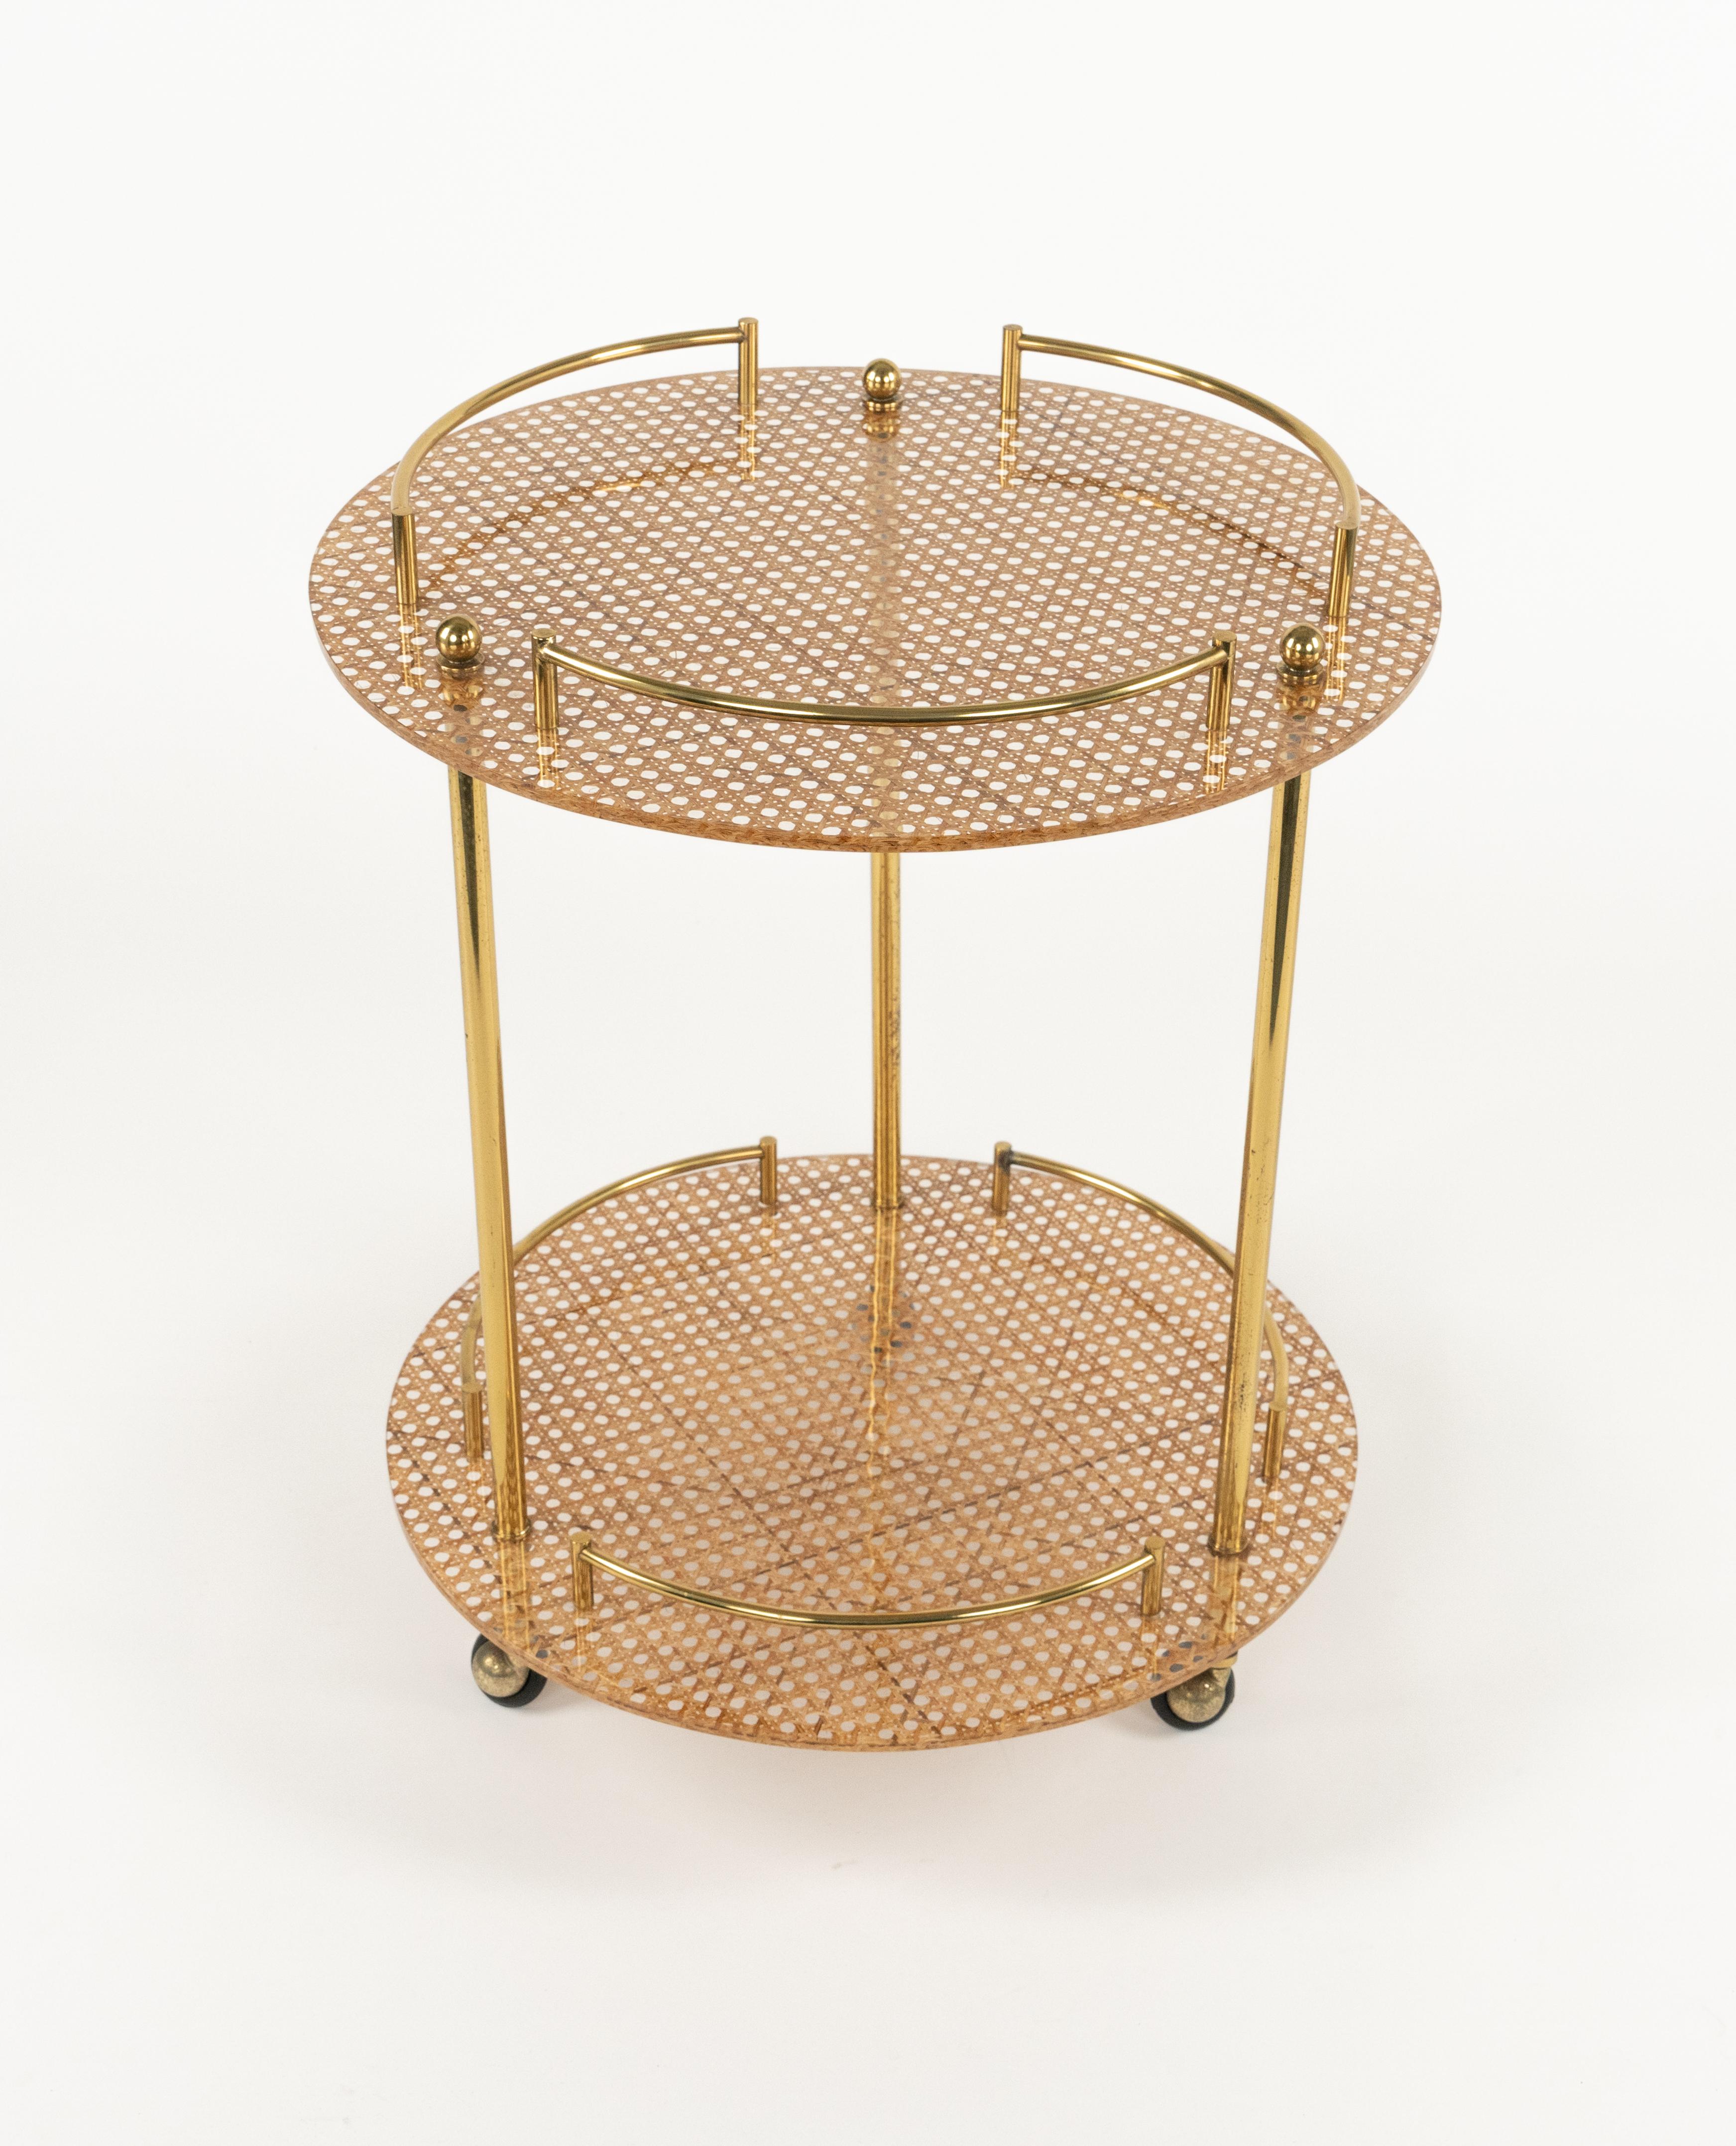 Midcentury amazing round serving bar cart in lucite, brass and rattan in the style of Christian Dior Home.

Made in Italy in the 1970s.